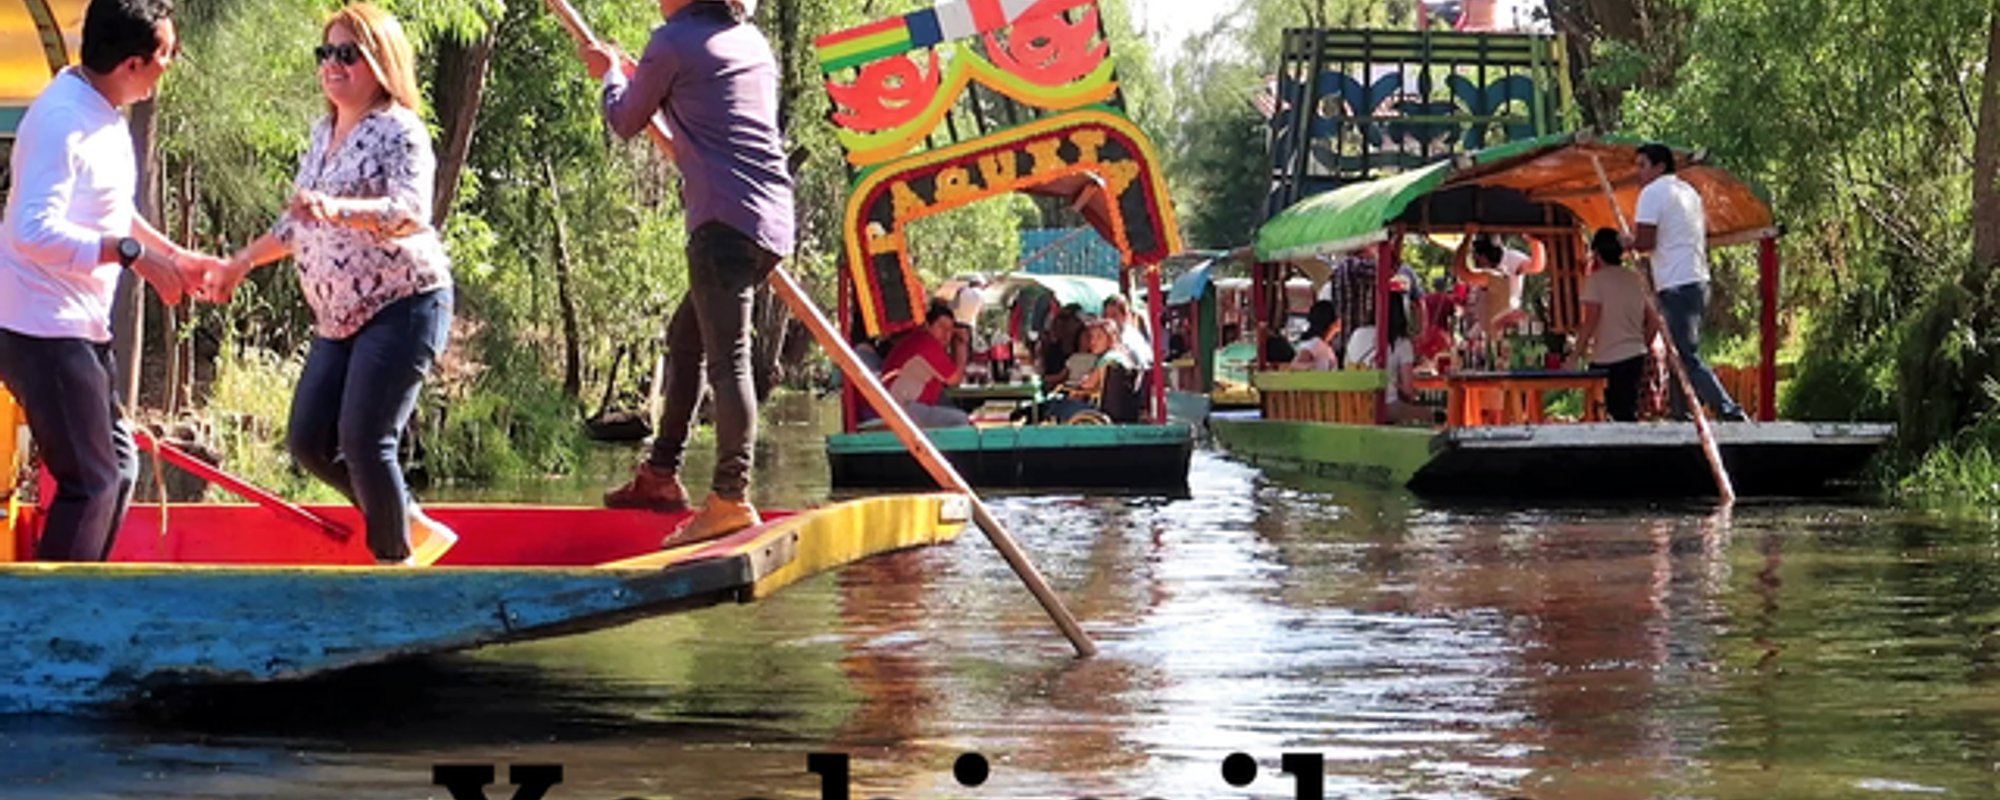 DTube - Xochimilco, the Canals of Mexico City